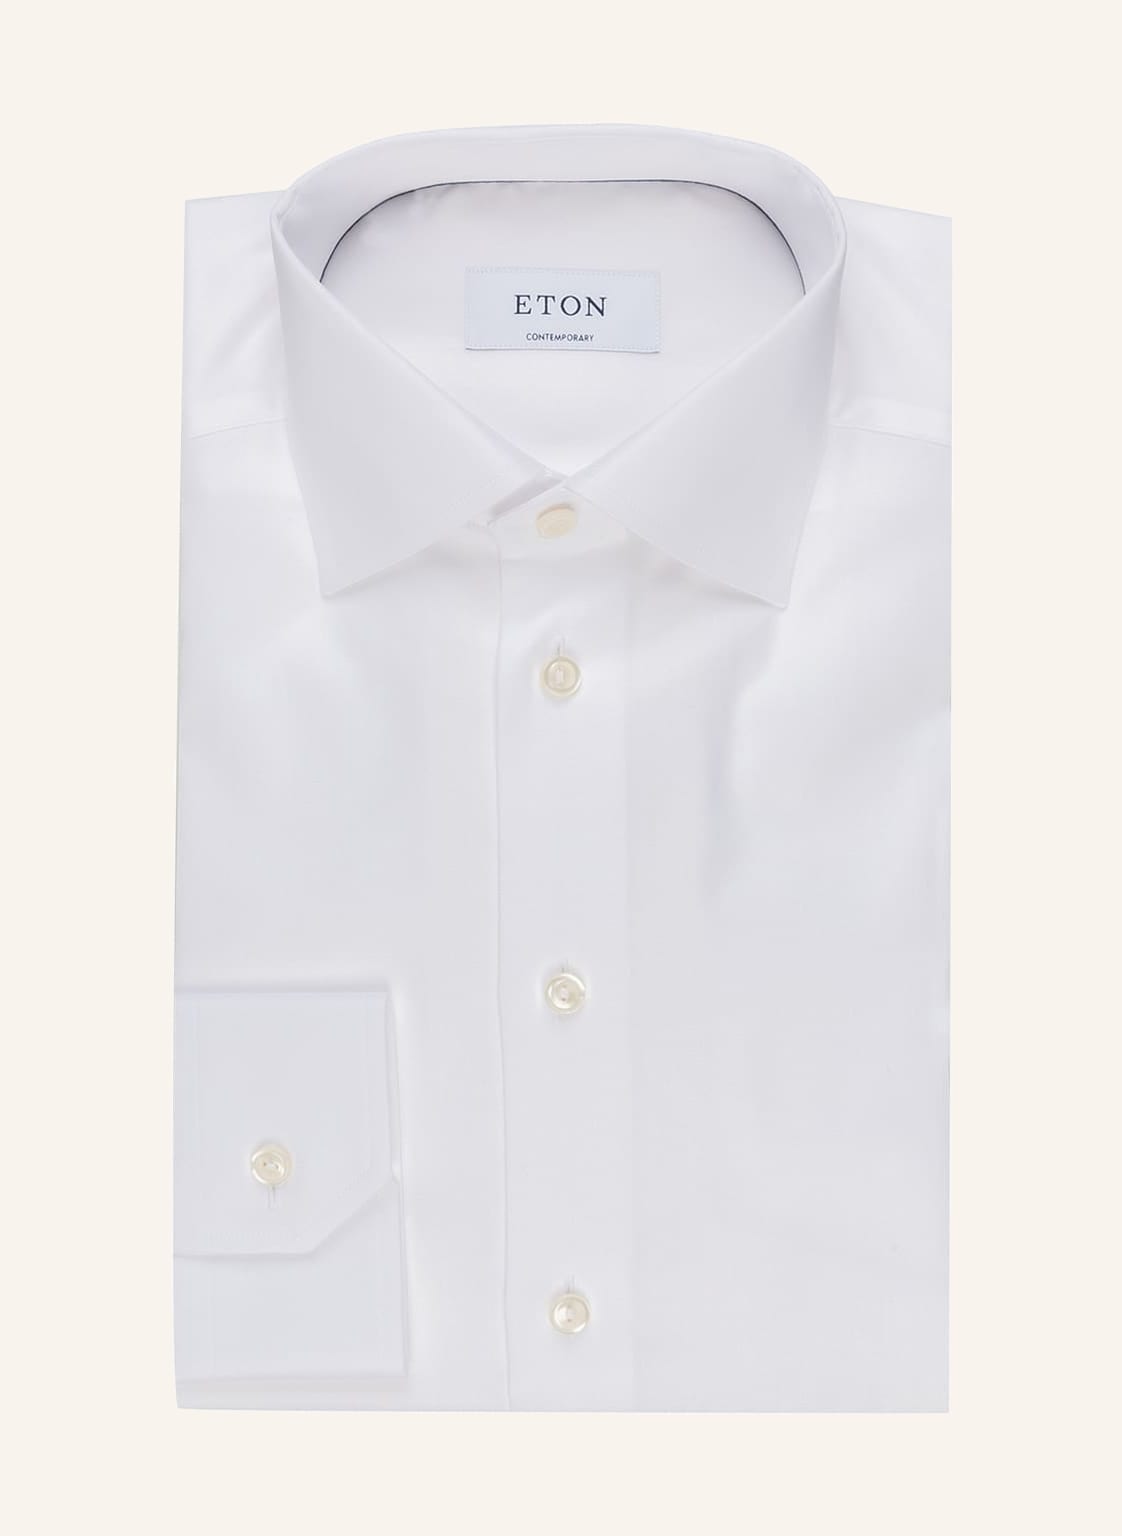 Image of Eton Hemd Contemporary Fit weiss